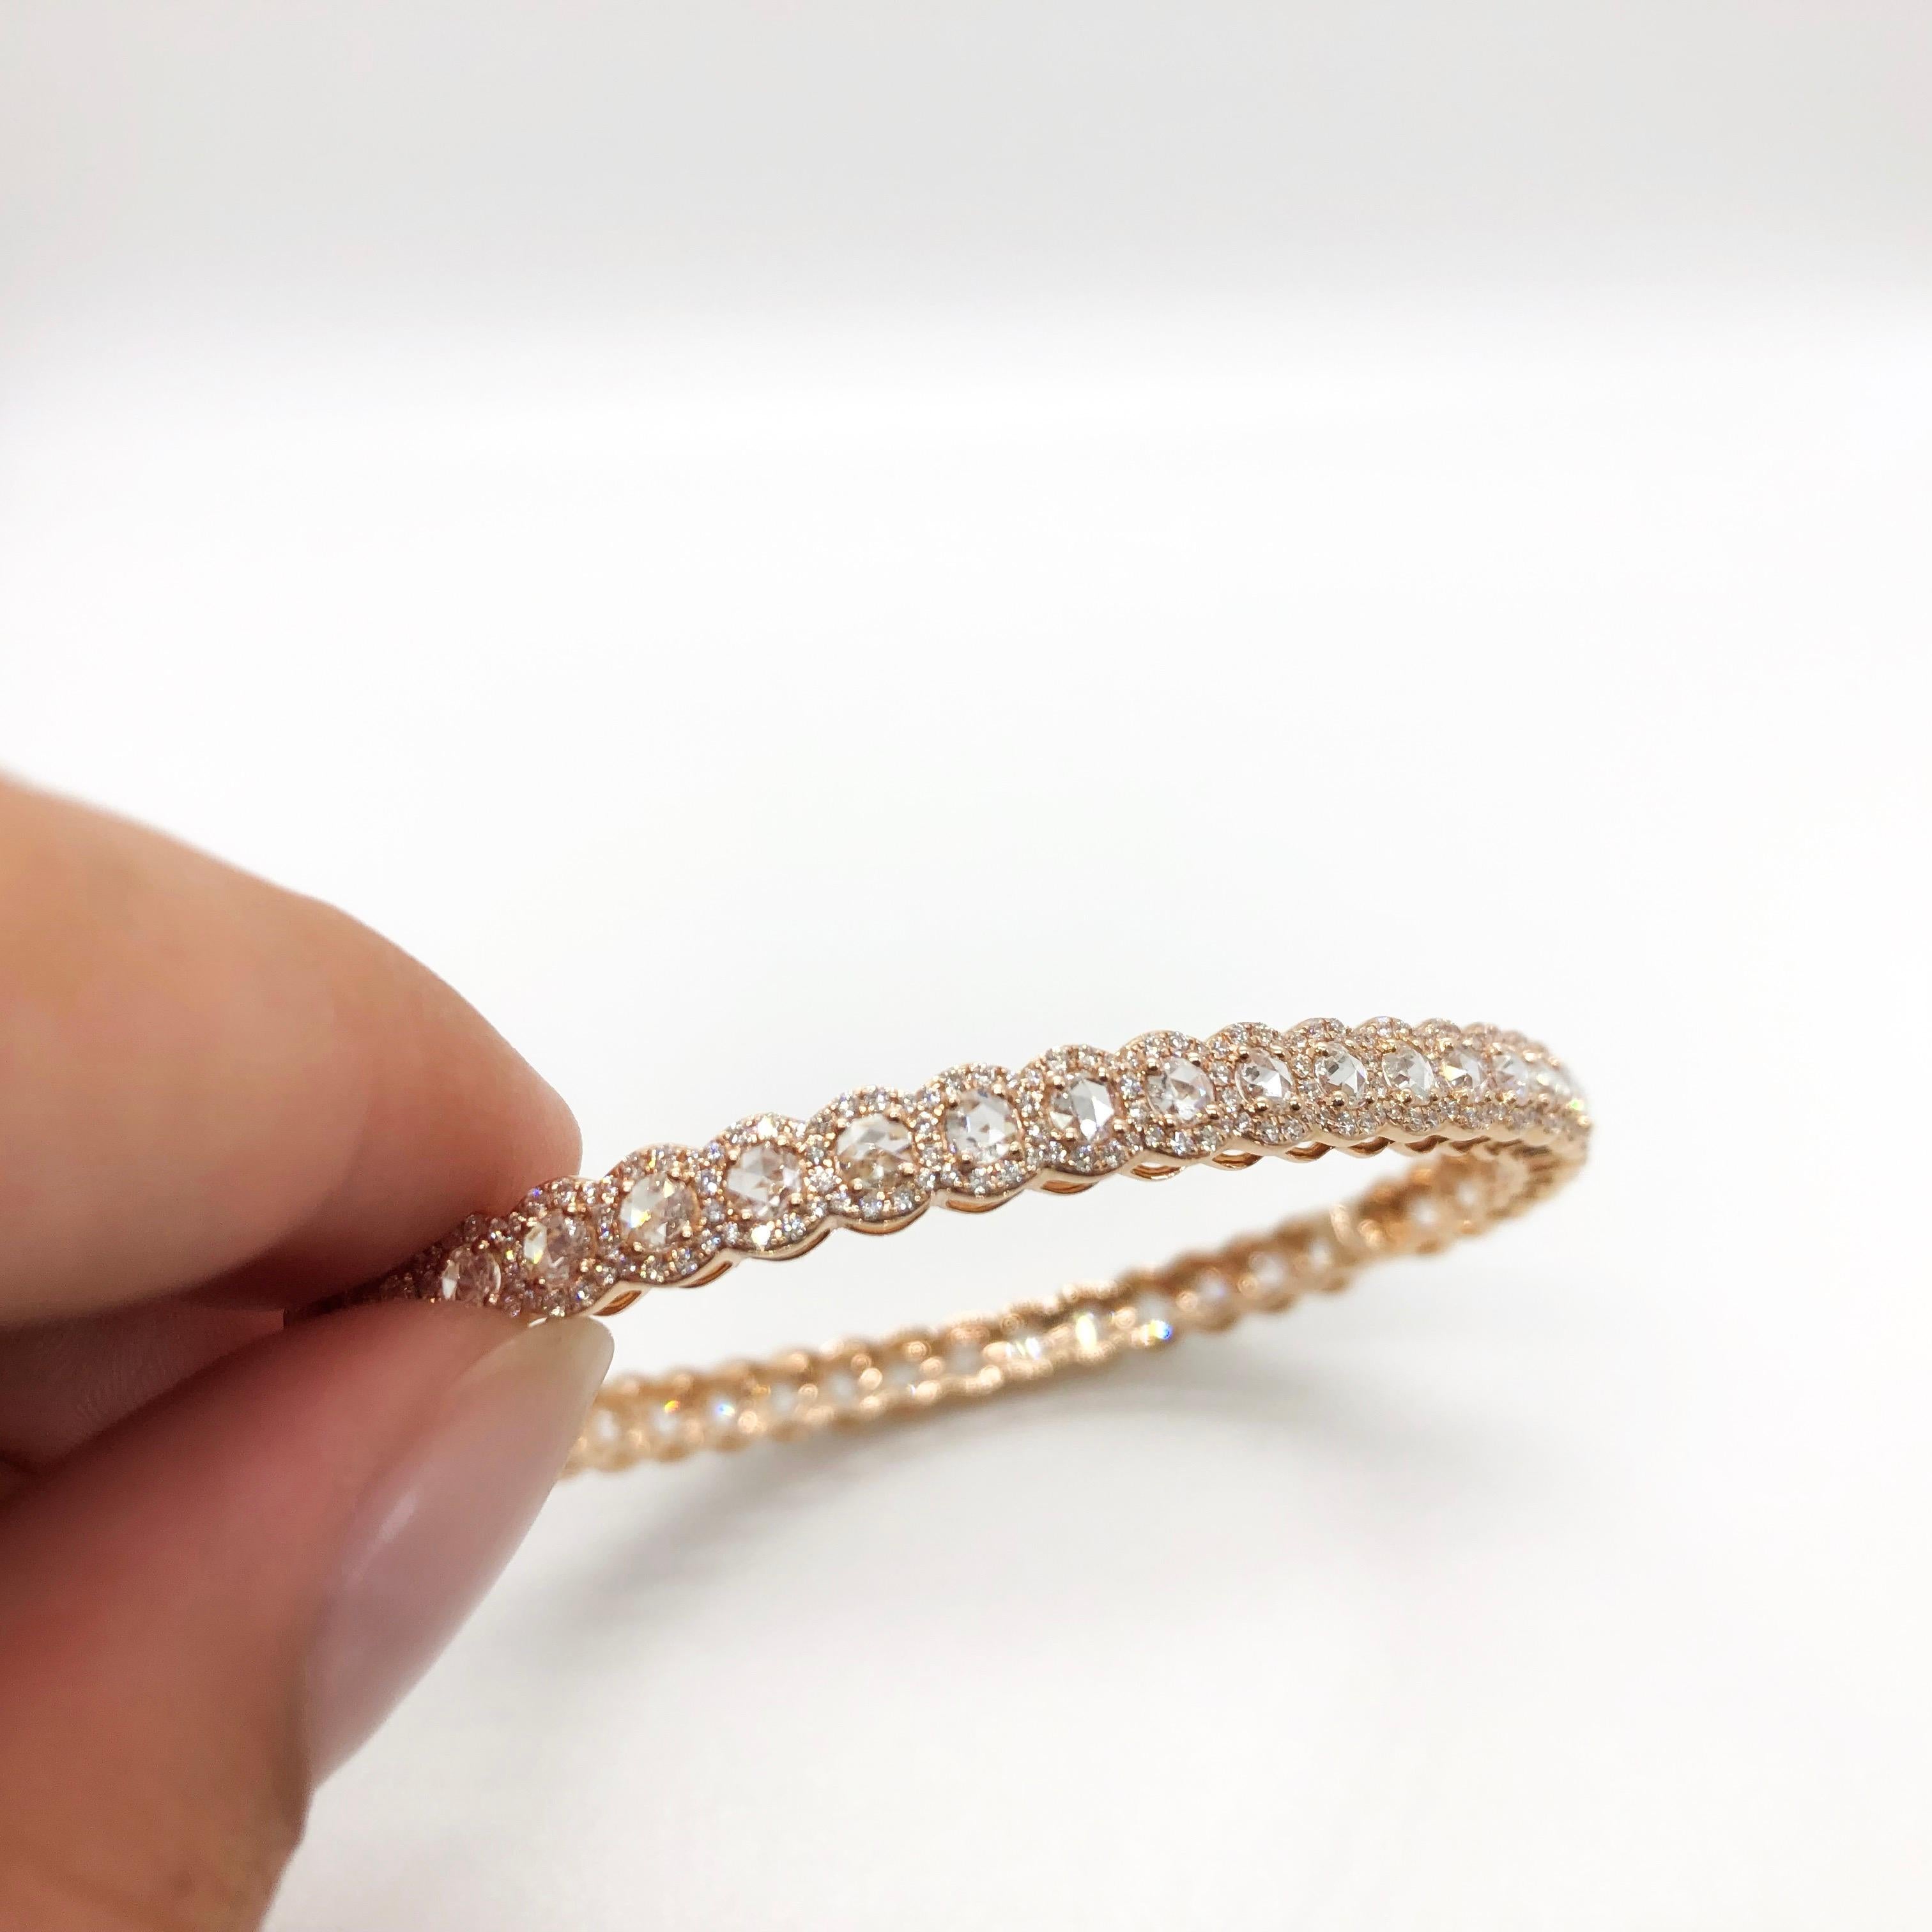 64 Facets 3.40 Carat Rose Cut Diamond Scallop Bangle Bracelet in White Gold In New Condition For Sale In Los Angeles, CA